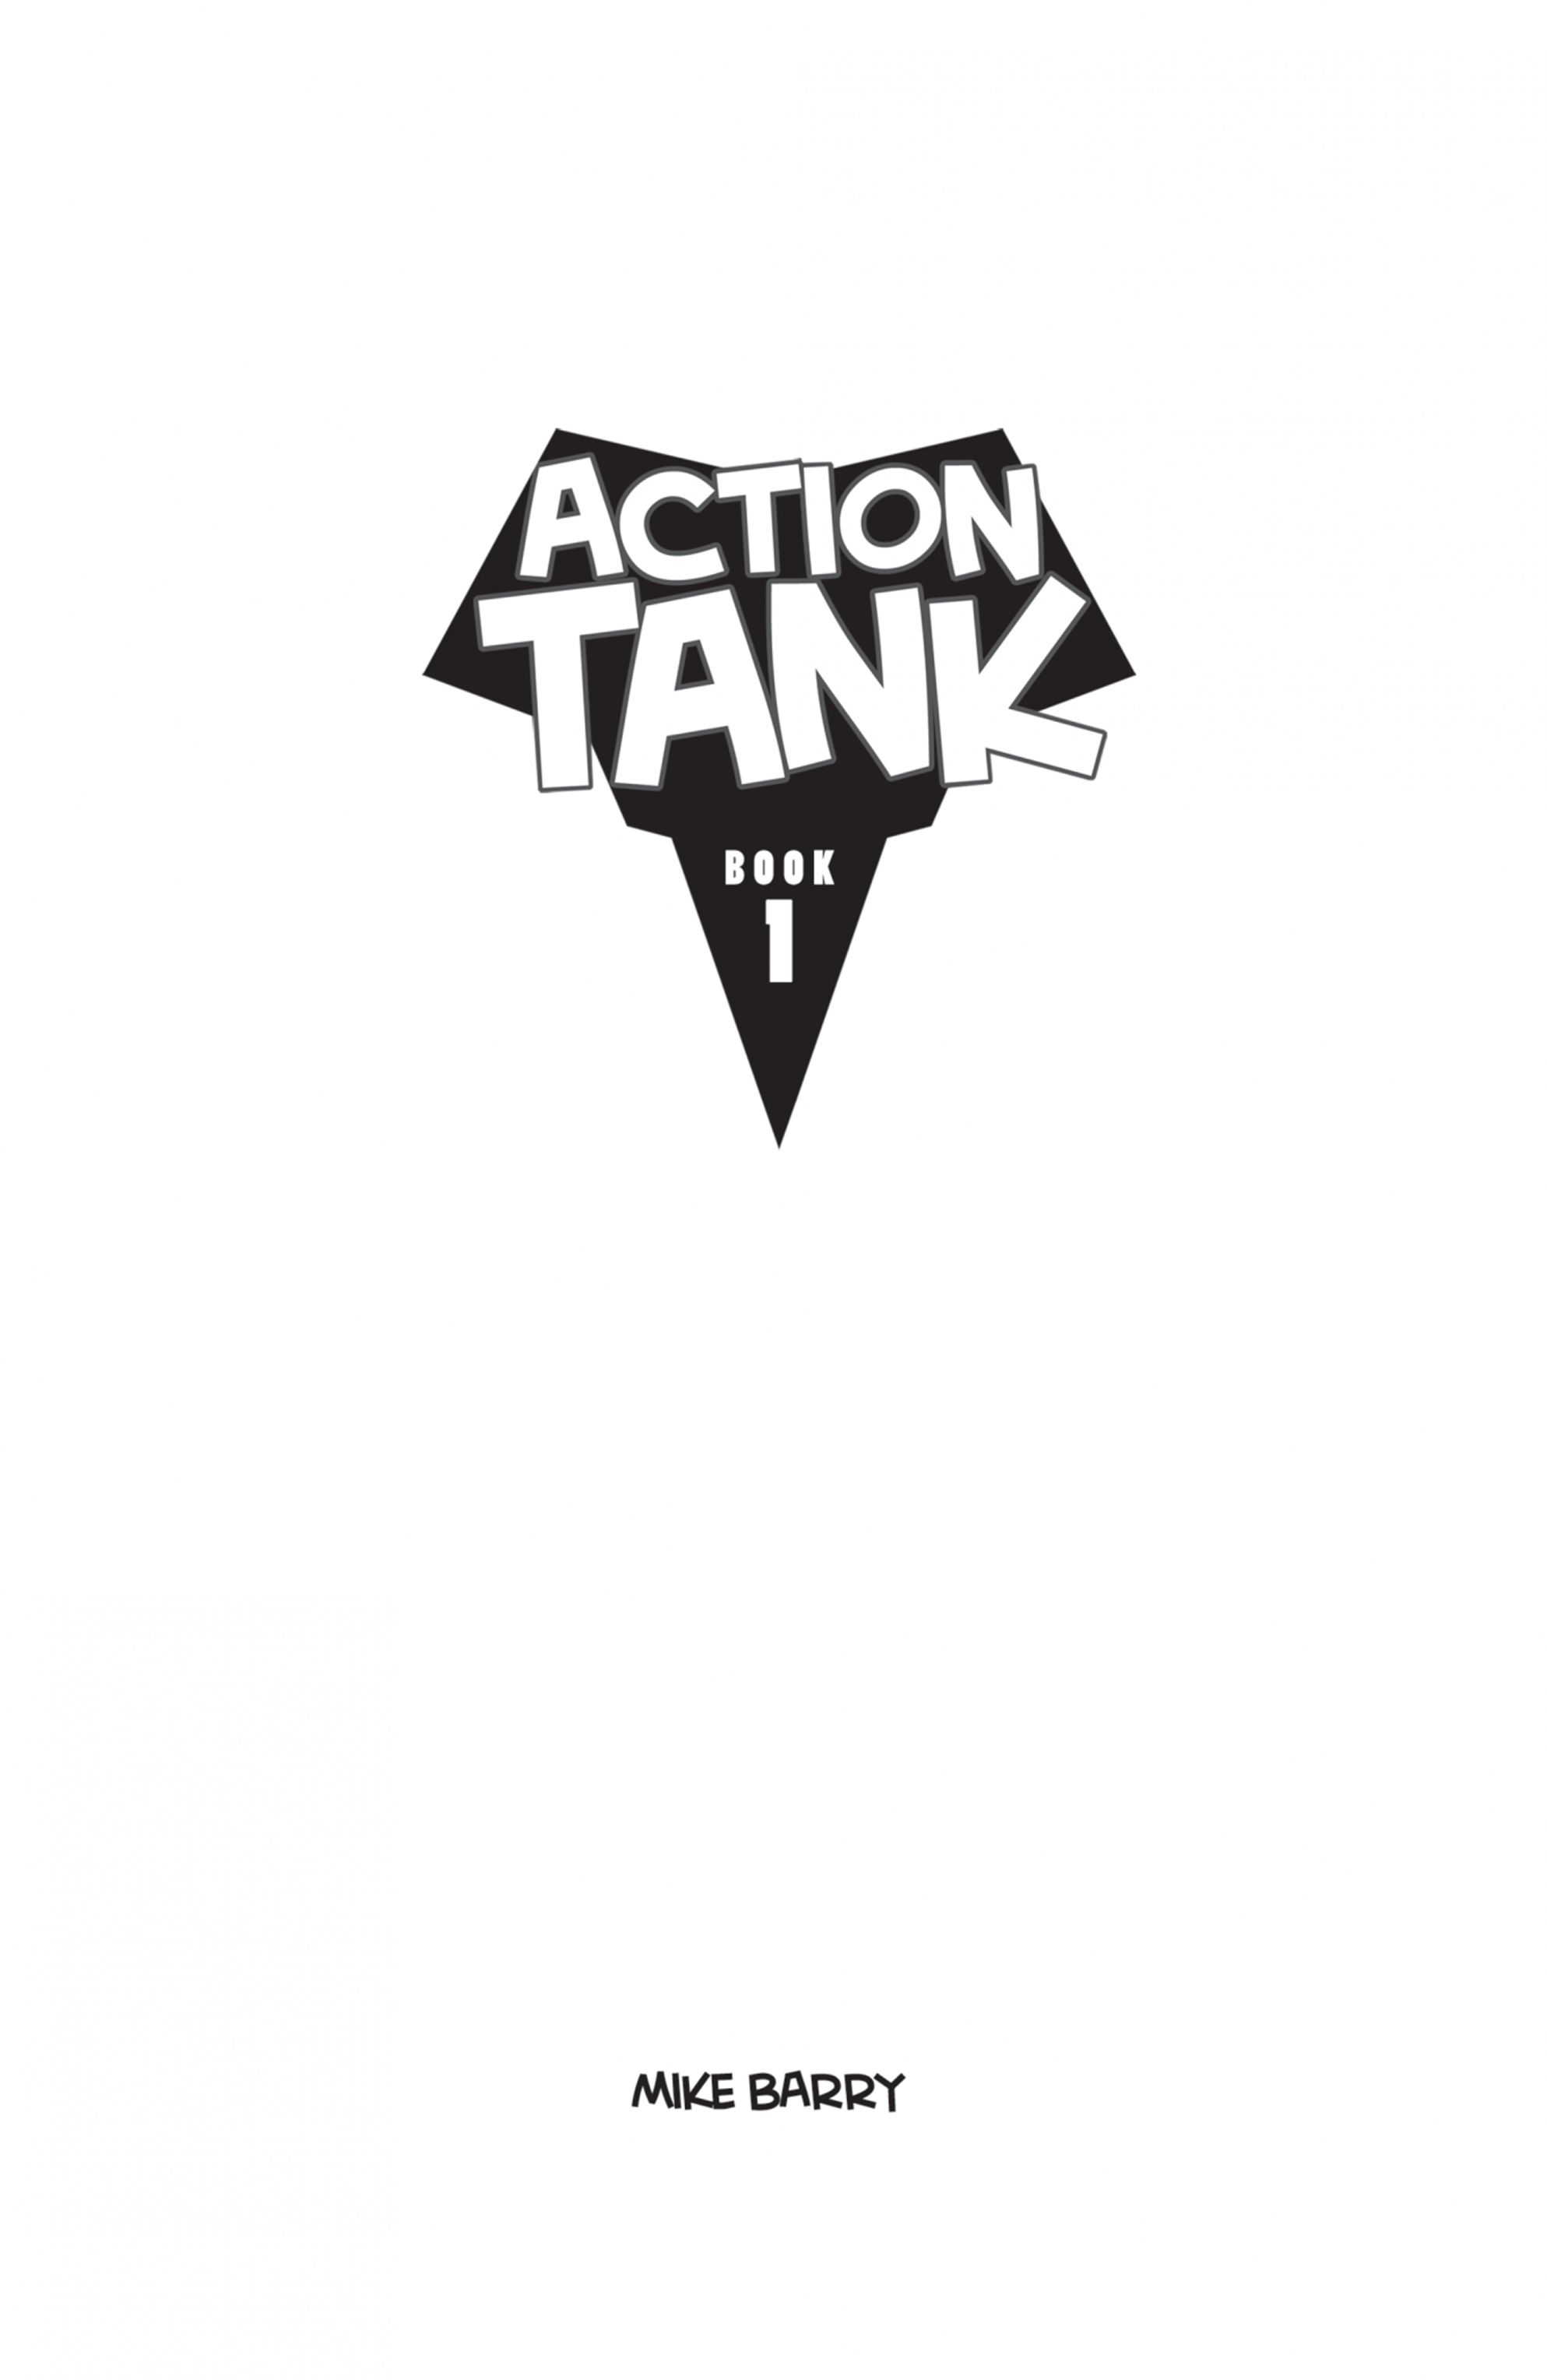 Read online Action Tank comic -  Issue # TPB - 3